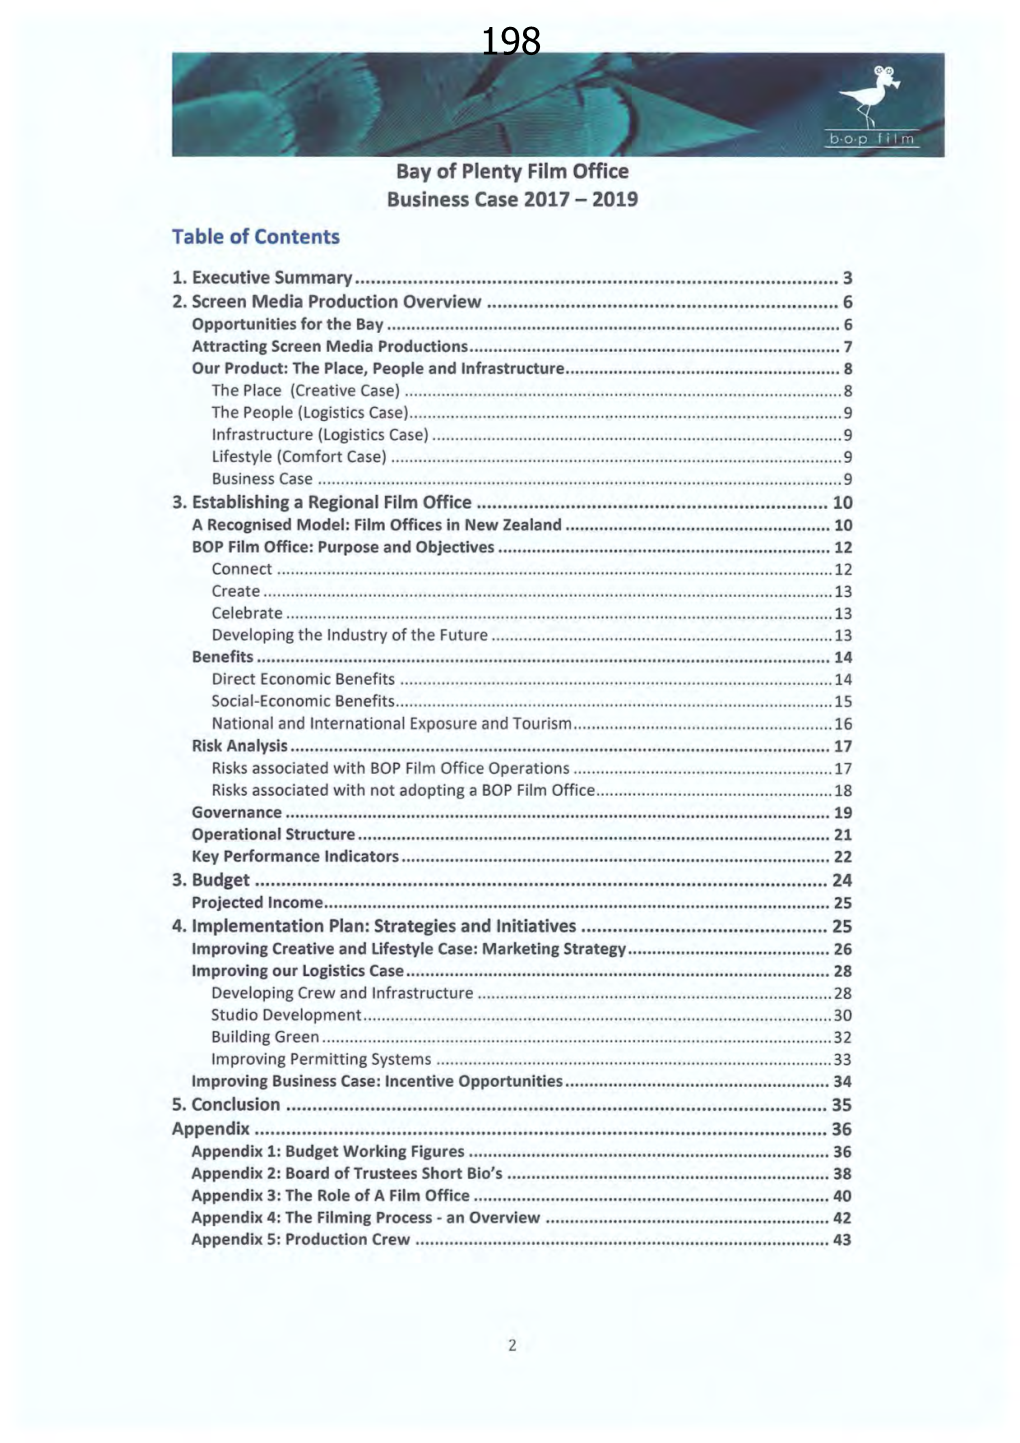 Table of Contents Bay of Plenty Film Office Business Case 2017-2019